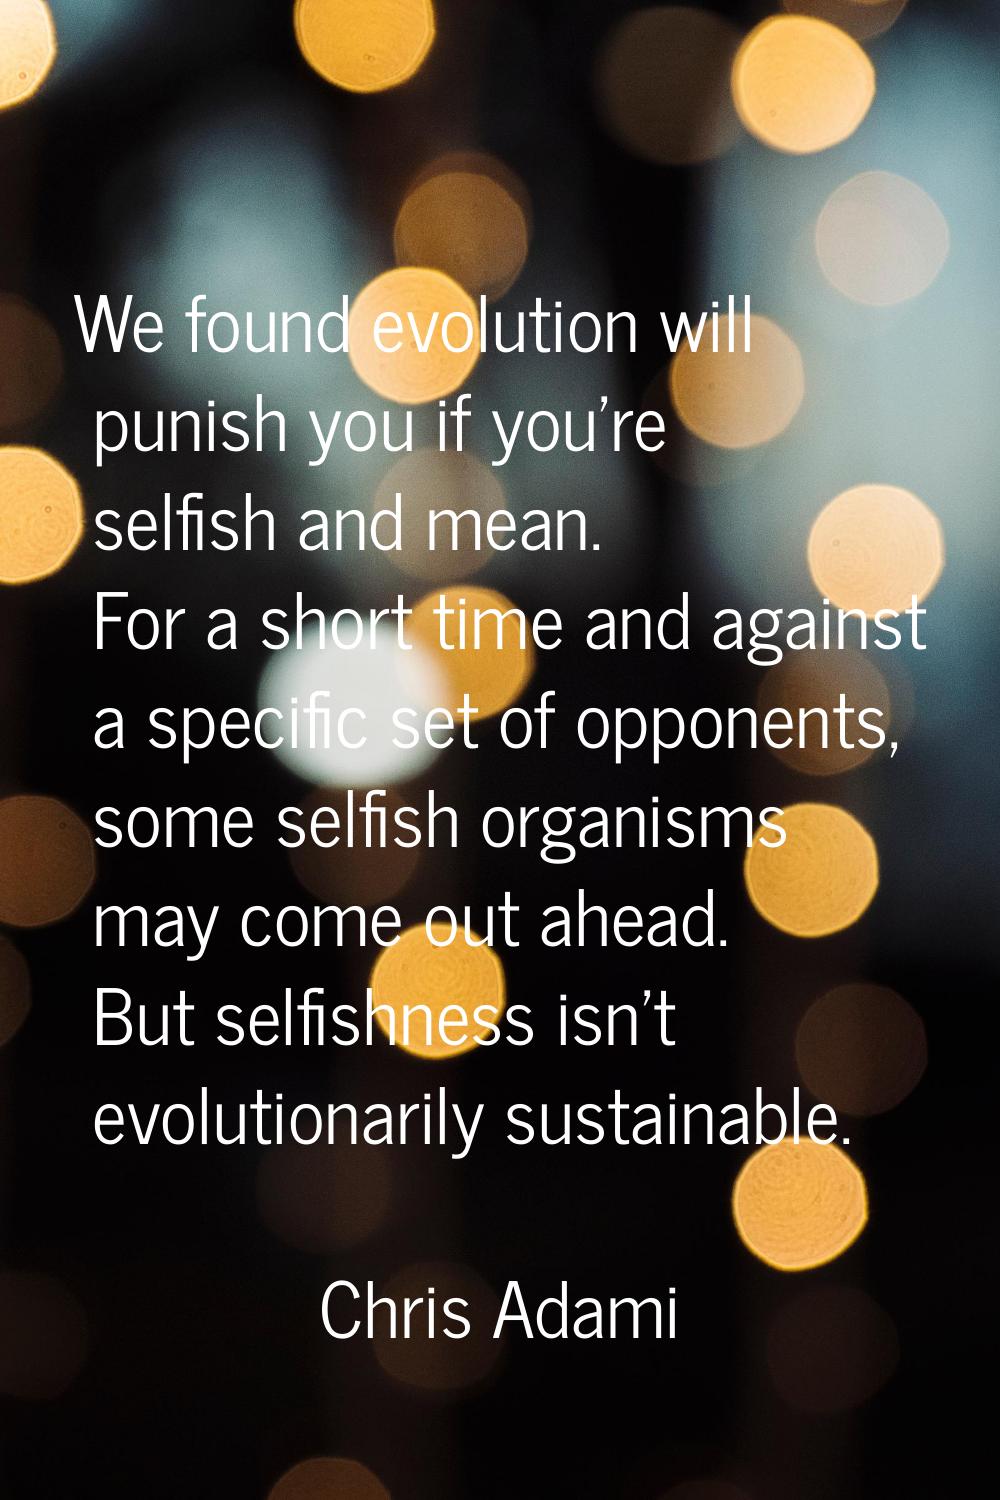 We found evolution will punish you if you're selfish and mean. For a short time and against a speci